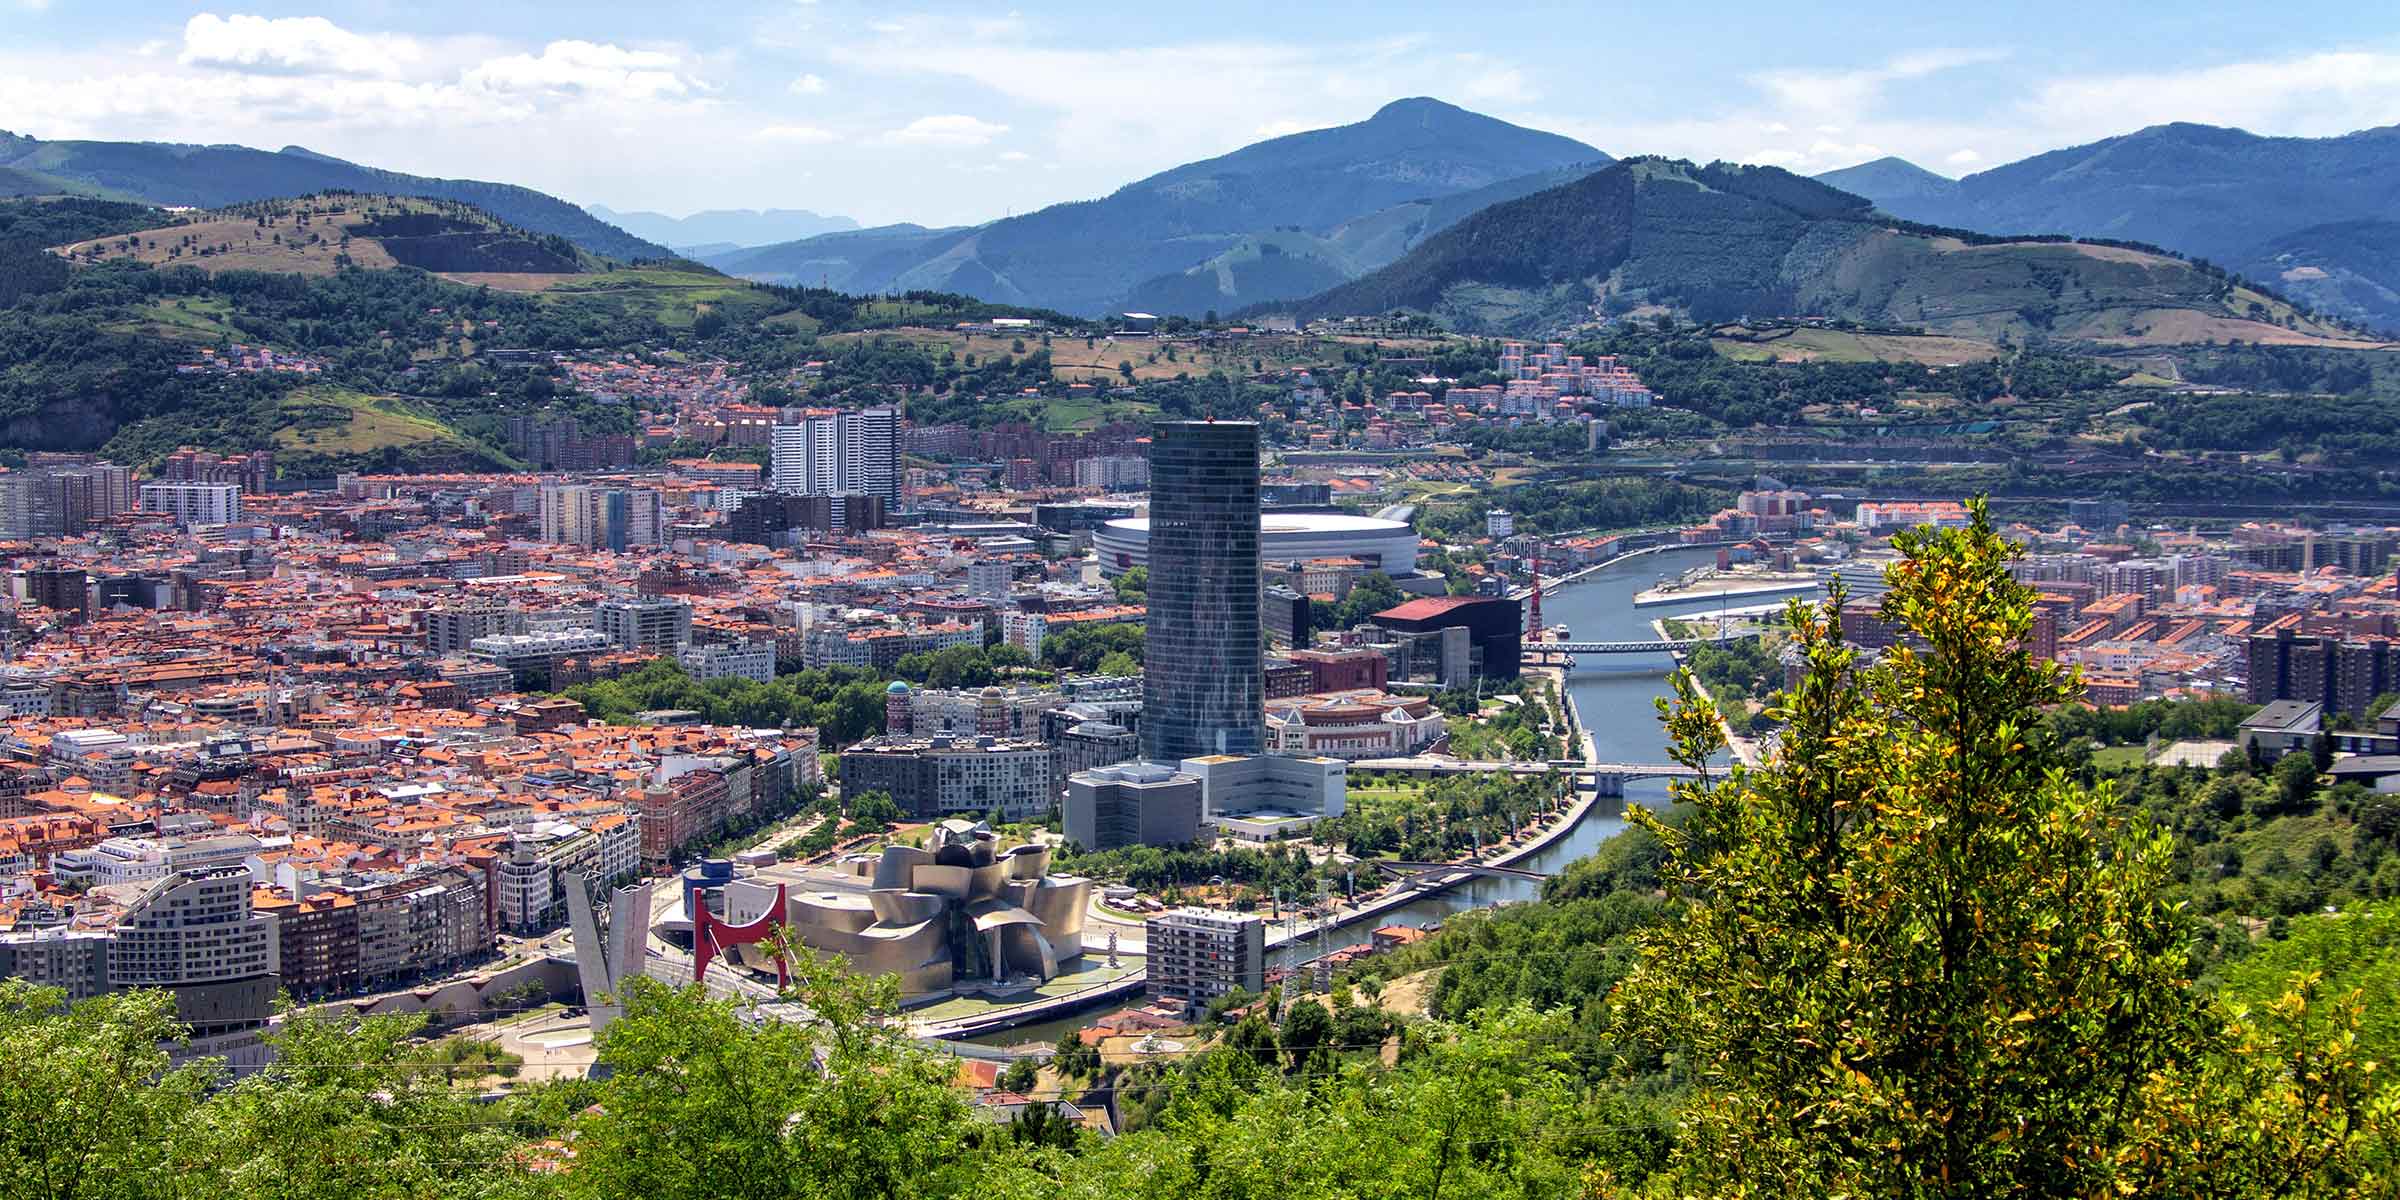 birds eye view of the city of Bilbao, with vegetation in the foreground and mountains in the background.